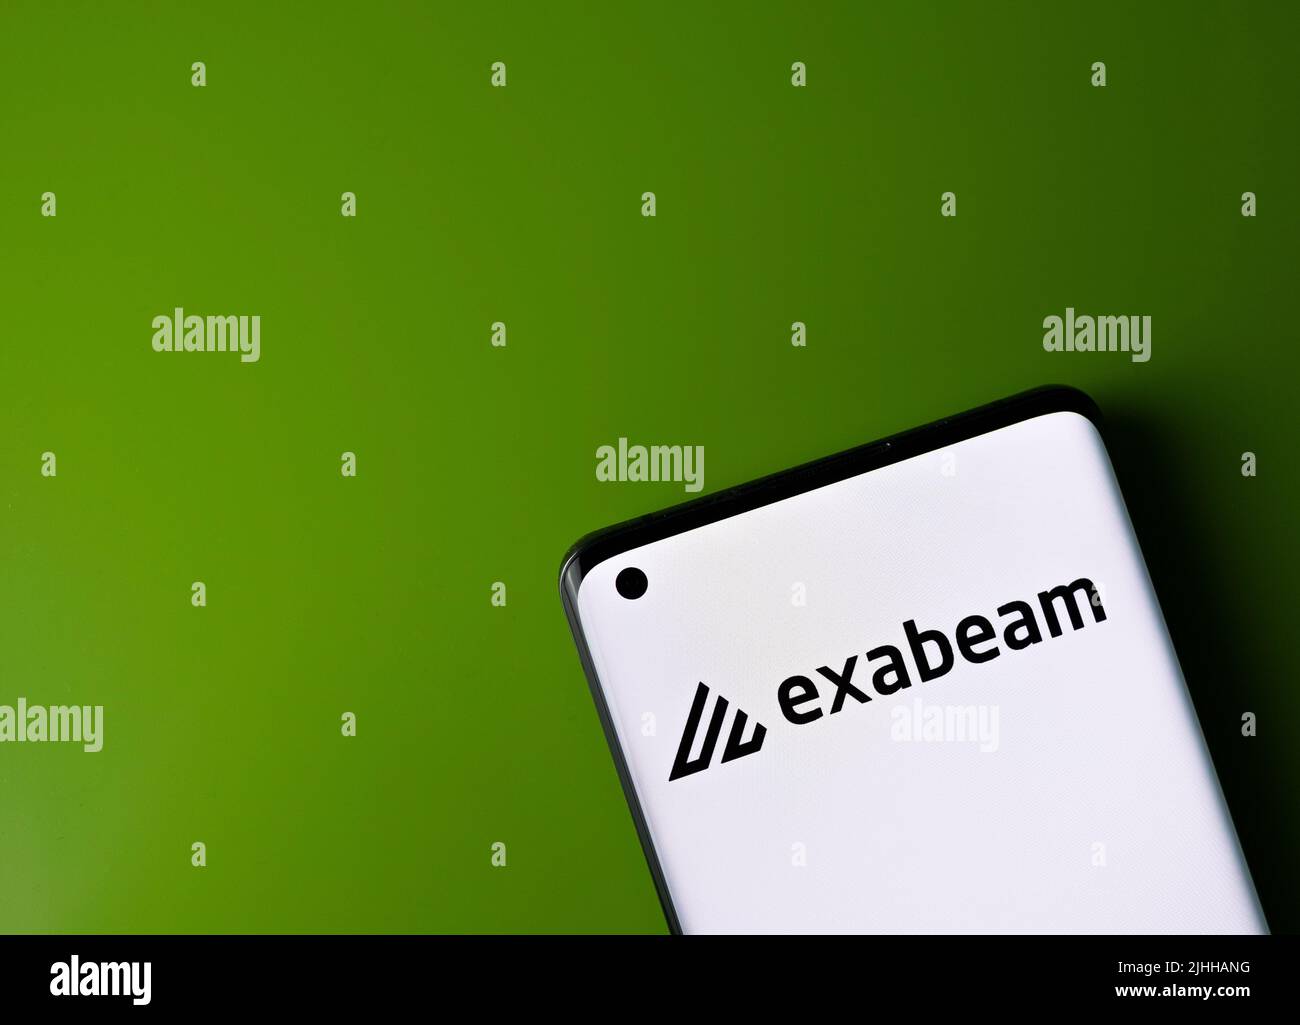 Exabeam logo seen on smartphone screen with copy space. Stock Photo